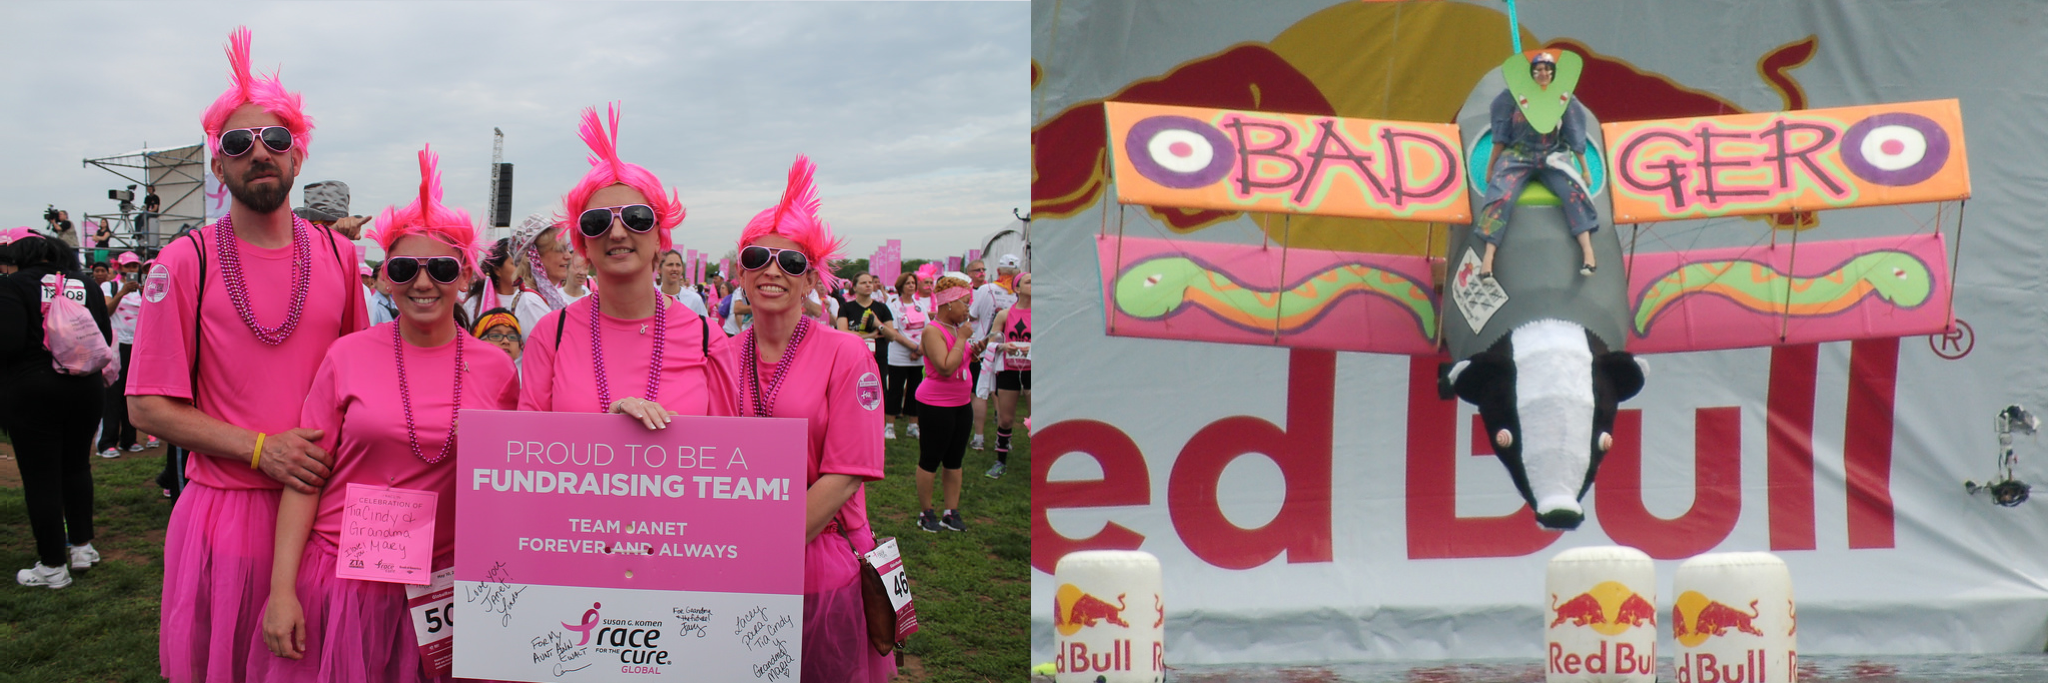 Left: Photo taken at a Race for the Cure event: Four pink-haired people clothed all in pink hold a sign that says, Proud to be a fundraising team! Team Janet forever and always. Right: Photo taken at a Red Bull Flugtag event: A person rides a small biplane that looks like a badger. The plane's wings are brightly colored, feature cartoon snakes, and read Badger. The plane is in front of a giant Red Bull sign and above several inflated cans of Red Bull.